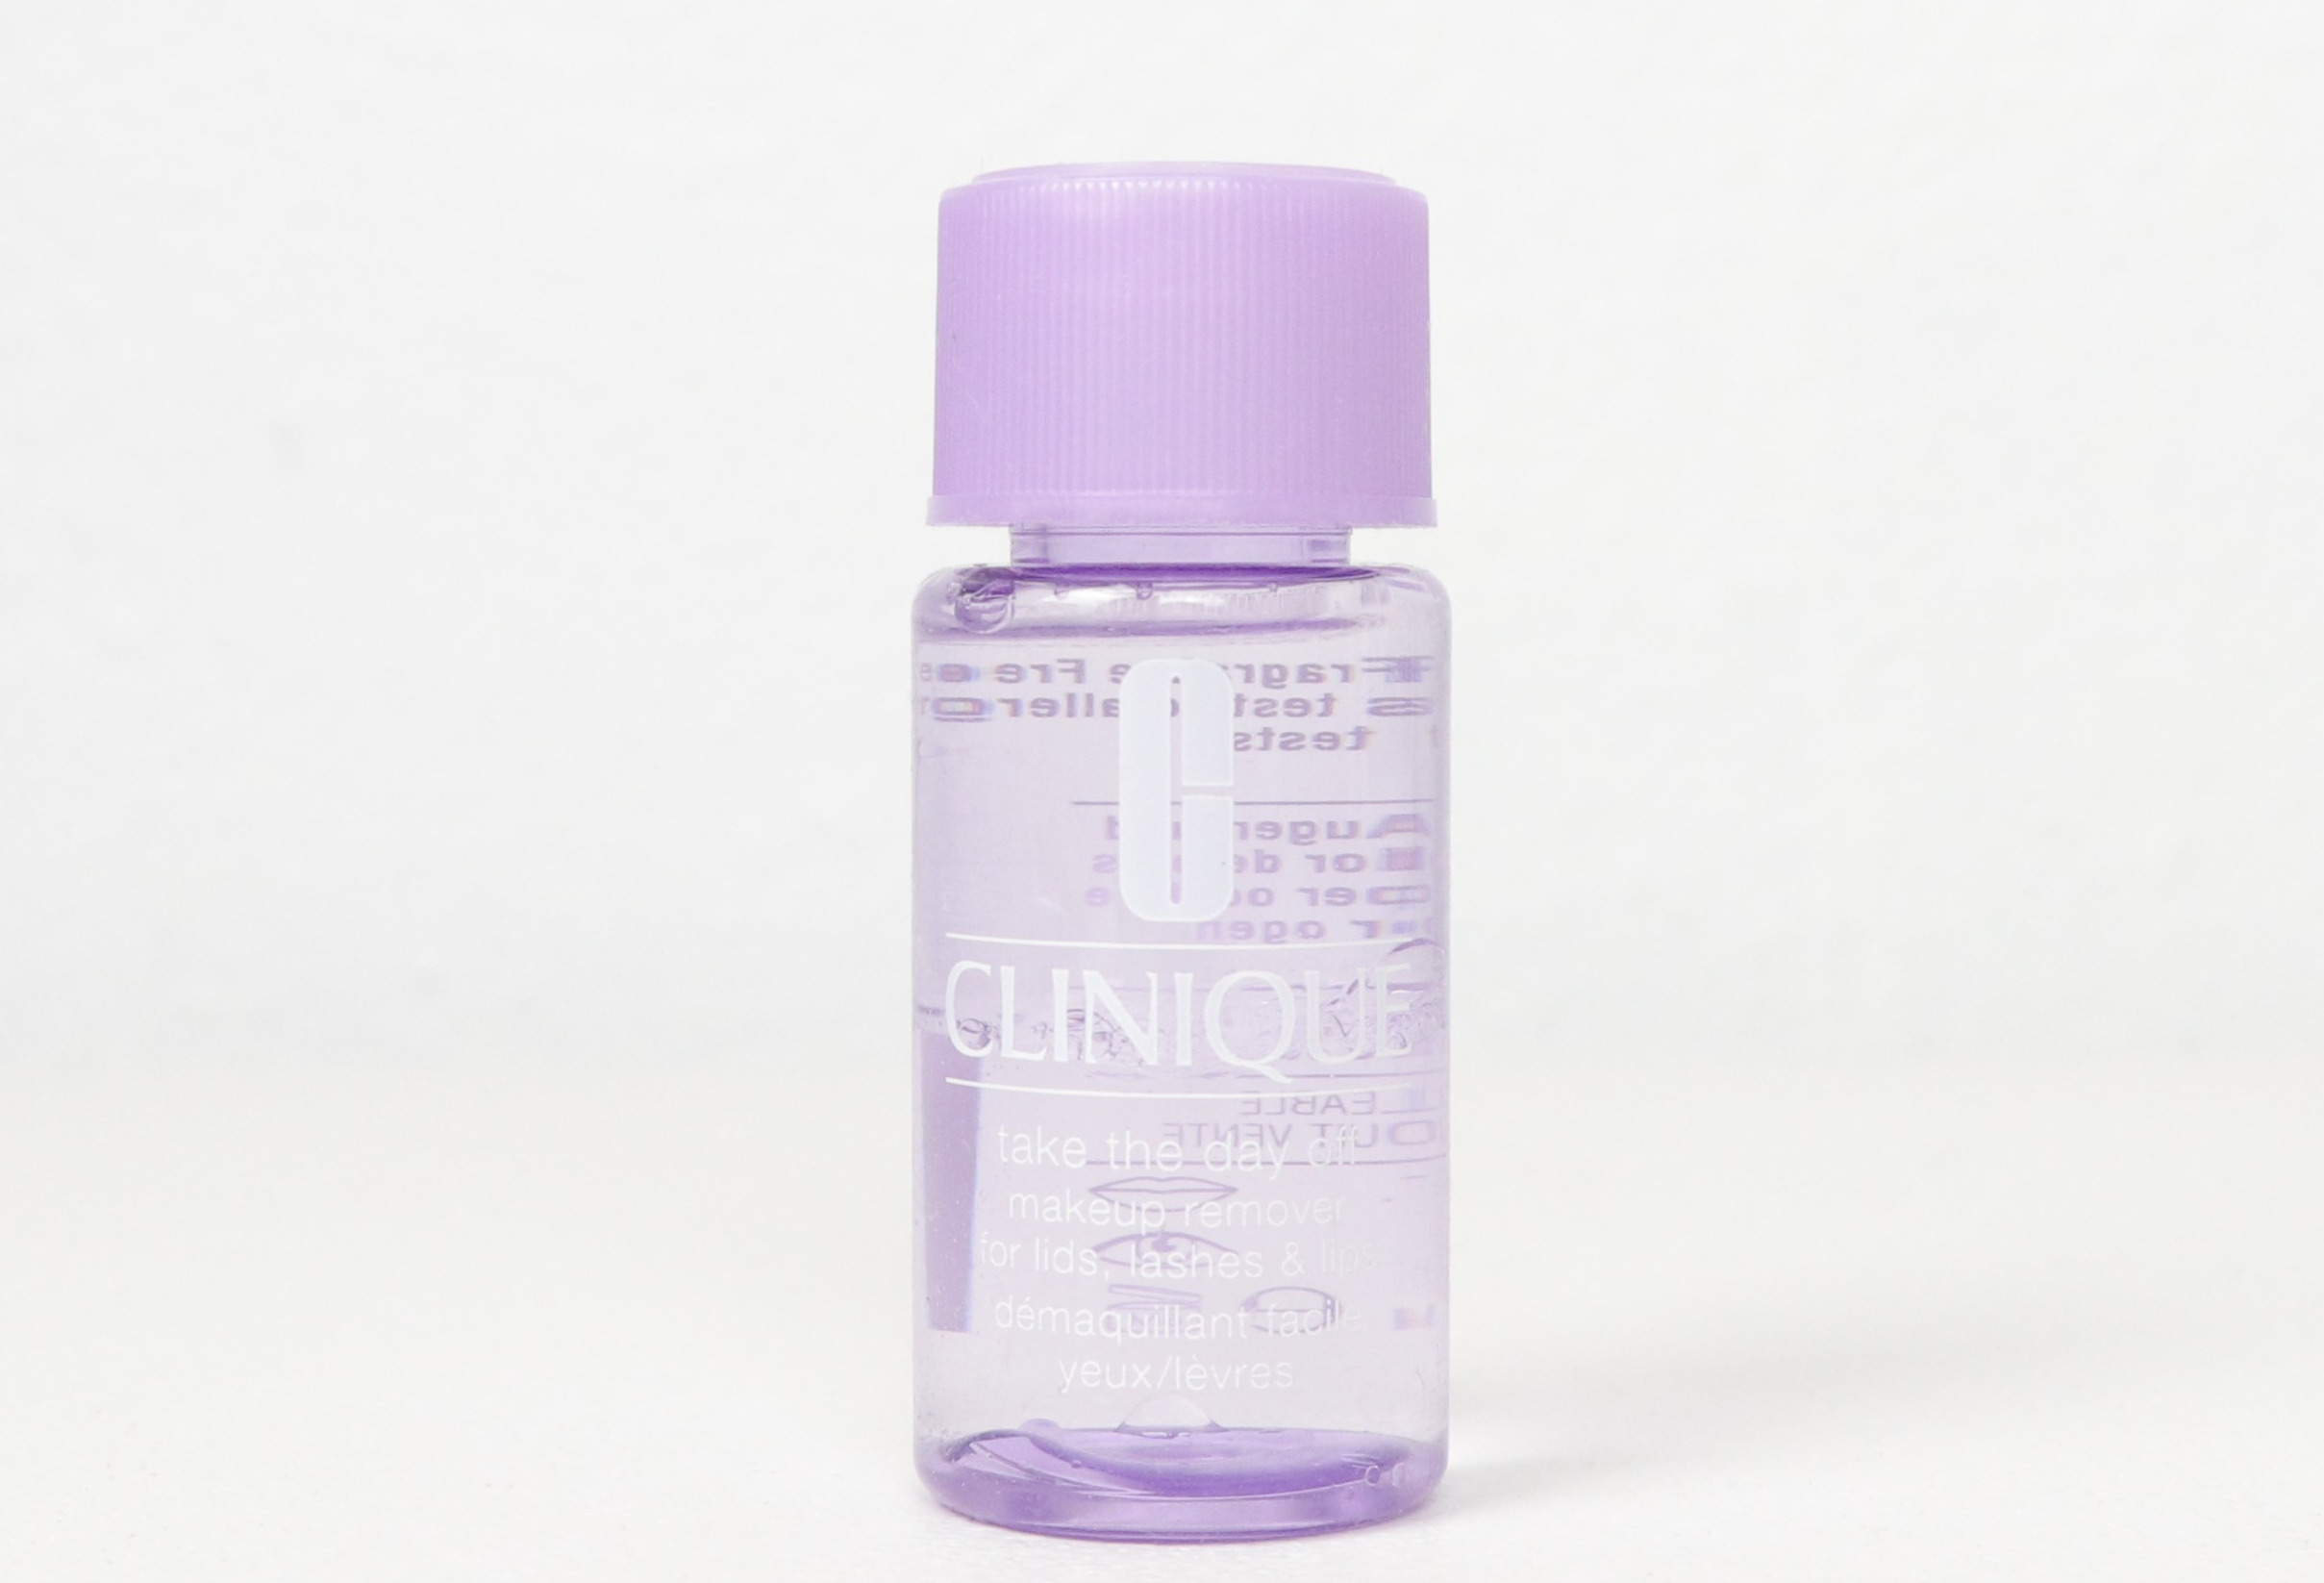 Clinique - Take The Day Off Makeup Remover For Lids, Lashes and Lips